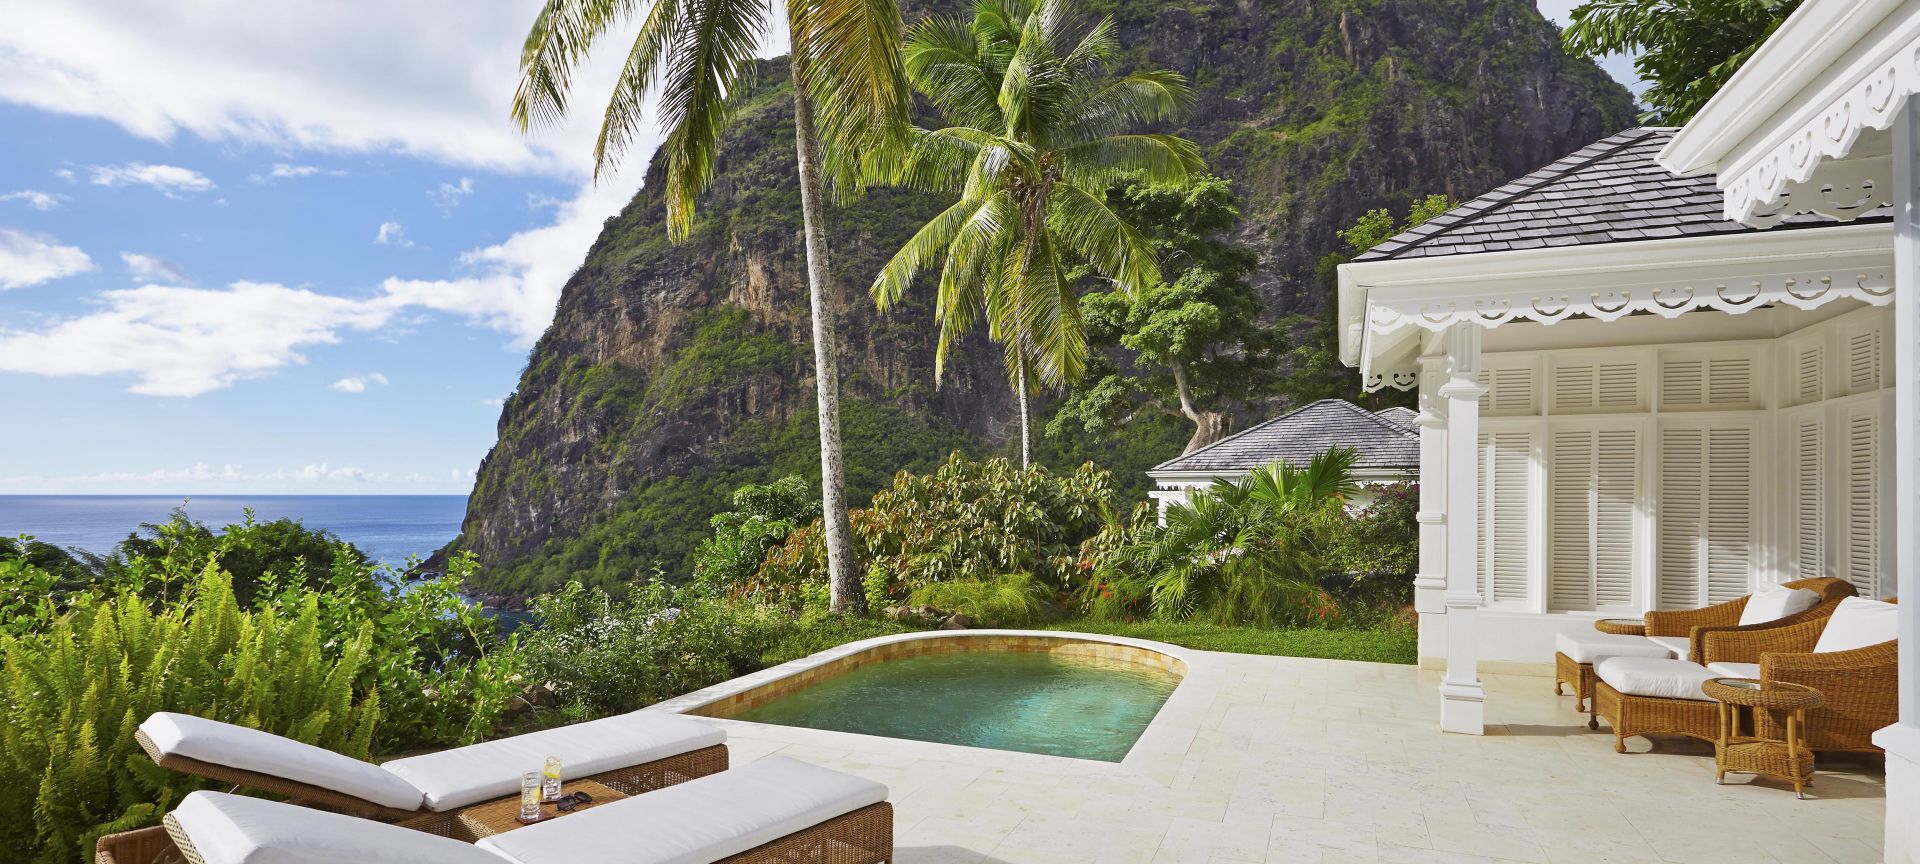 Luxury St. Lucia accommodations with dip pool and ocean views